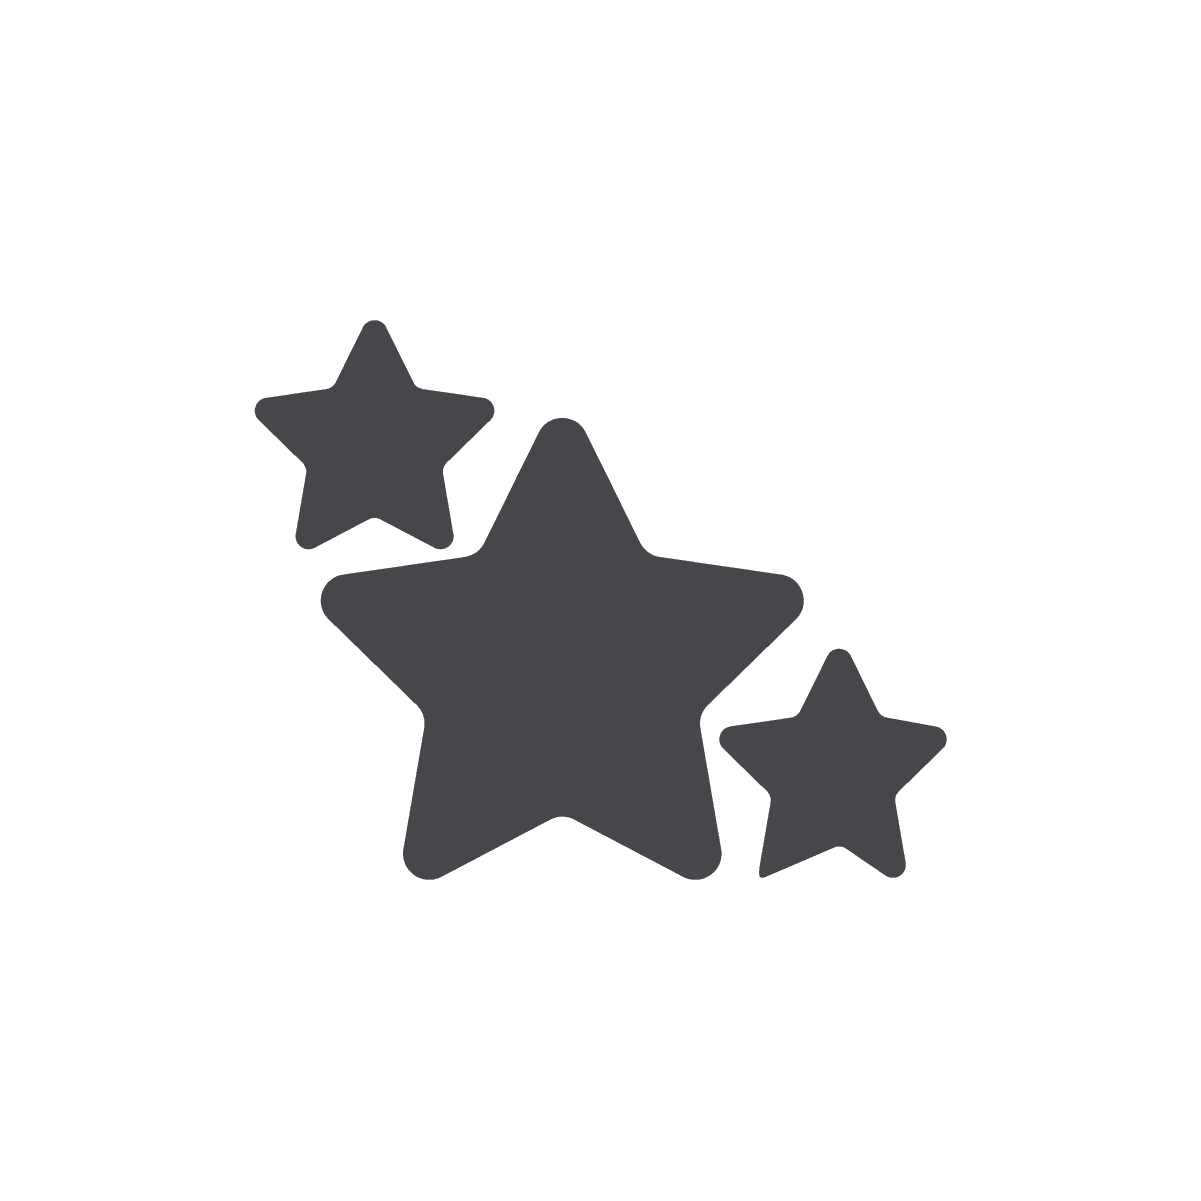 multiple black stars y2k elements for rating or achievement